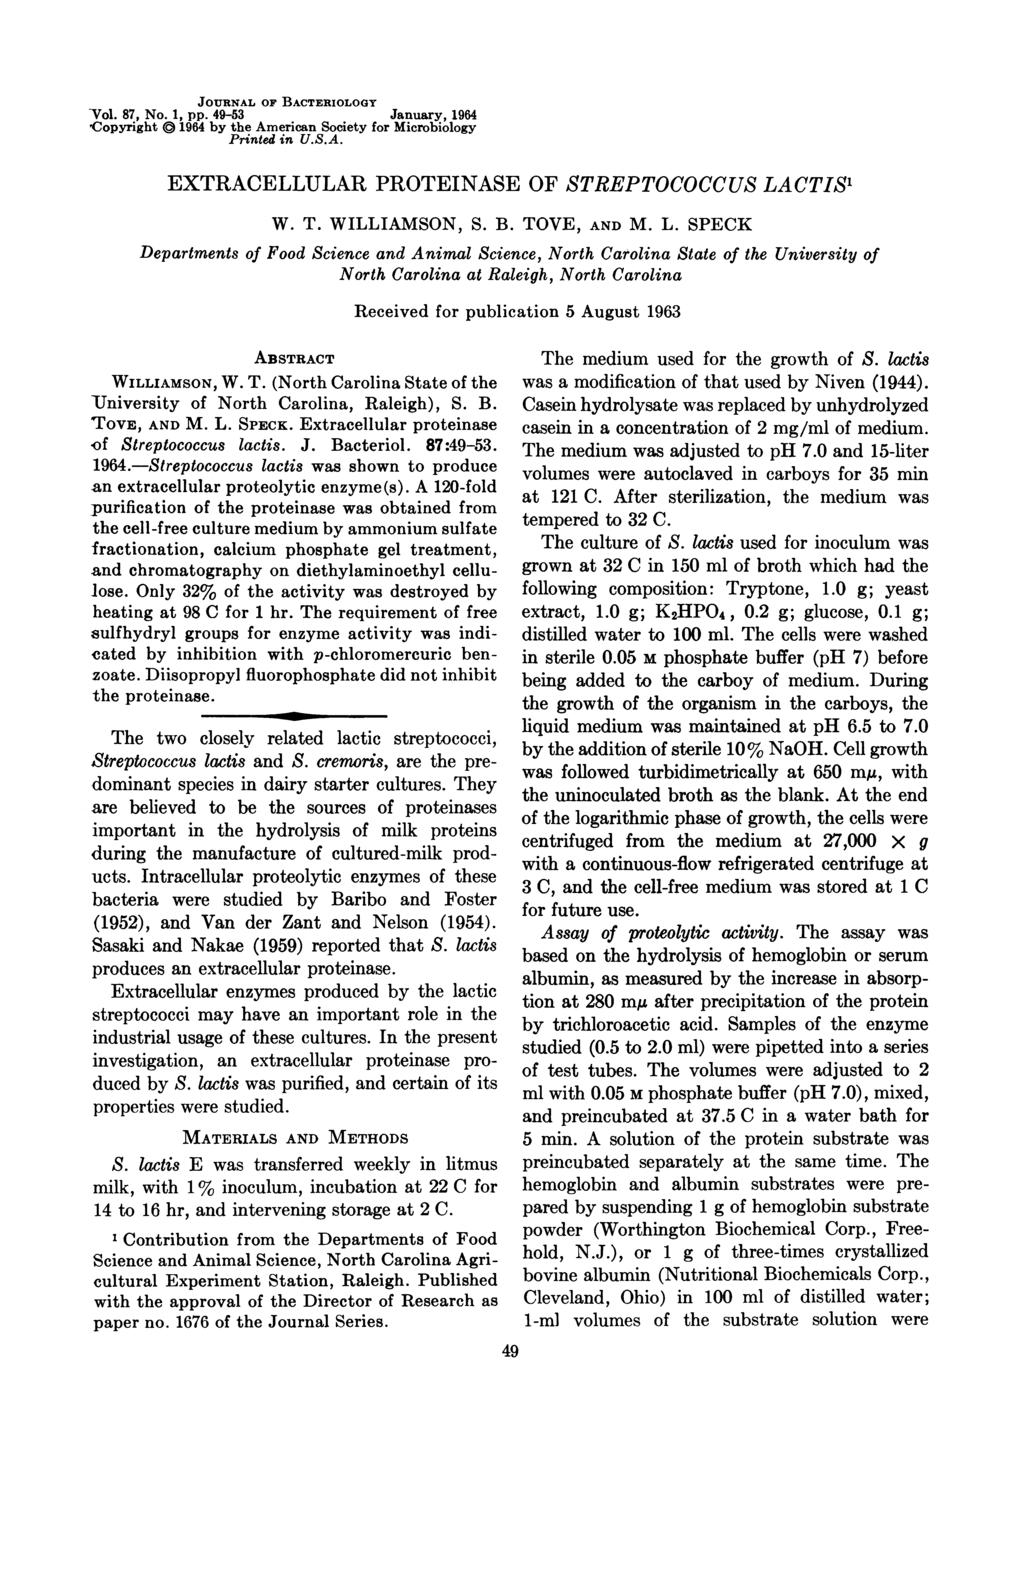 JOURnNAL OF BACTERIOLOGY Vol. 87, No. 1, pp. 49-53 January, 1964,Copyright 1964 by the American Society for Microbiology Printed in U.S.A. EXTRACELLULAR PROTEINASE OF STREPTOCOCCUS LACTIS' W. T.